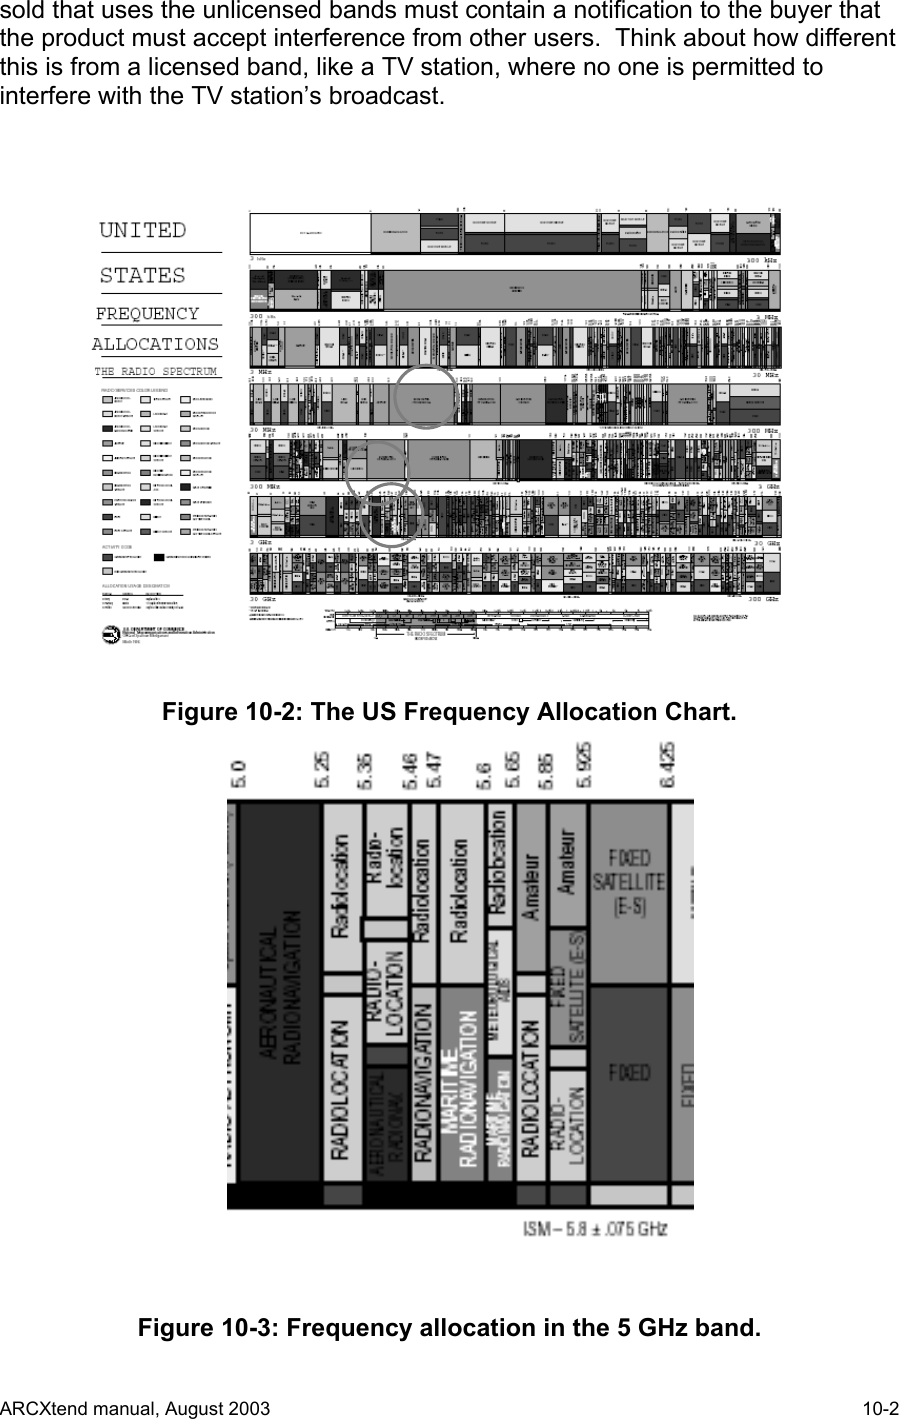  sold that uses the unlicensed bands must contain a notification to the buyer that the product must accept interference from other users.  Think about how different this is from a licensed band, like a TV station, where no one is permitted to interfere with the TV station’s broadcast.  Figure 10-2: The US Frequency Allocation Chart.  Figure 10-3: Frequency allocation in the 5 GHz band. ARCXtend manual, August 2003    10-2 